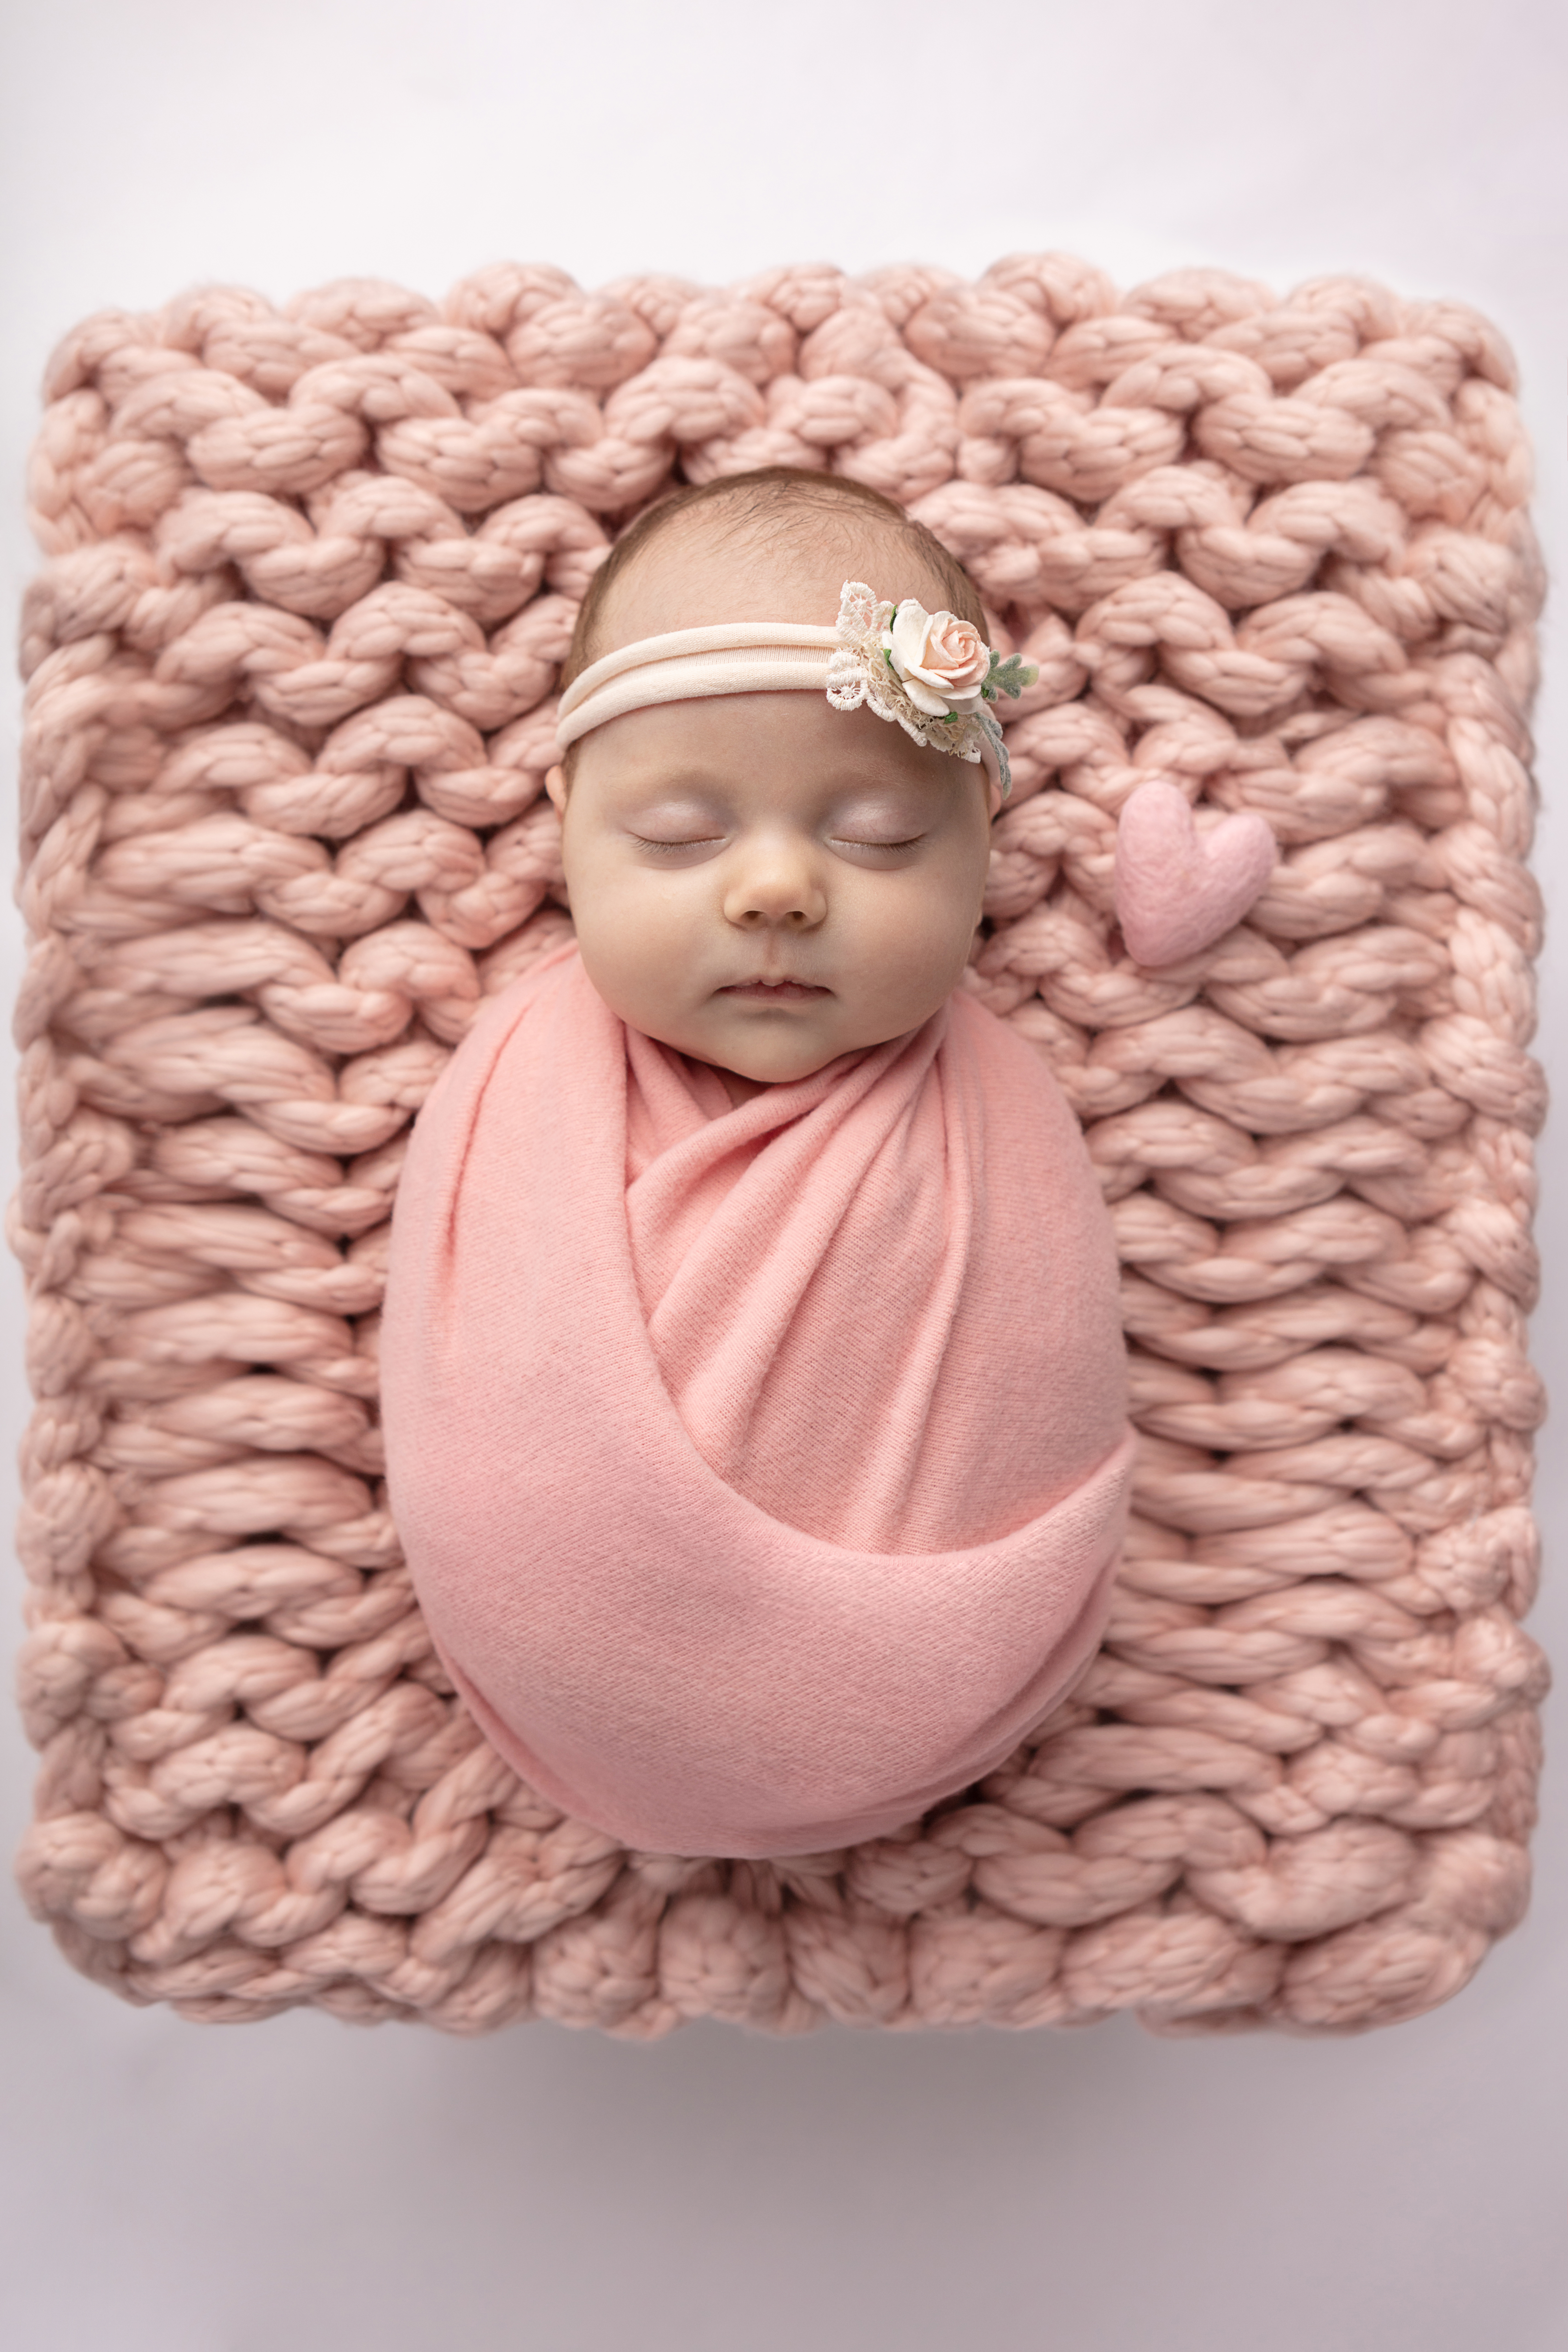 newborn baby girl swaddled in dusty pink, wearing a stretch floral headband; pink chunky knit blanket